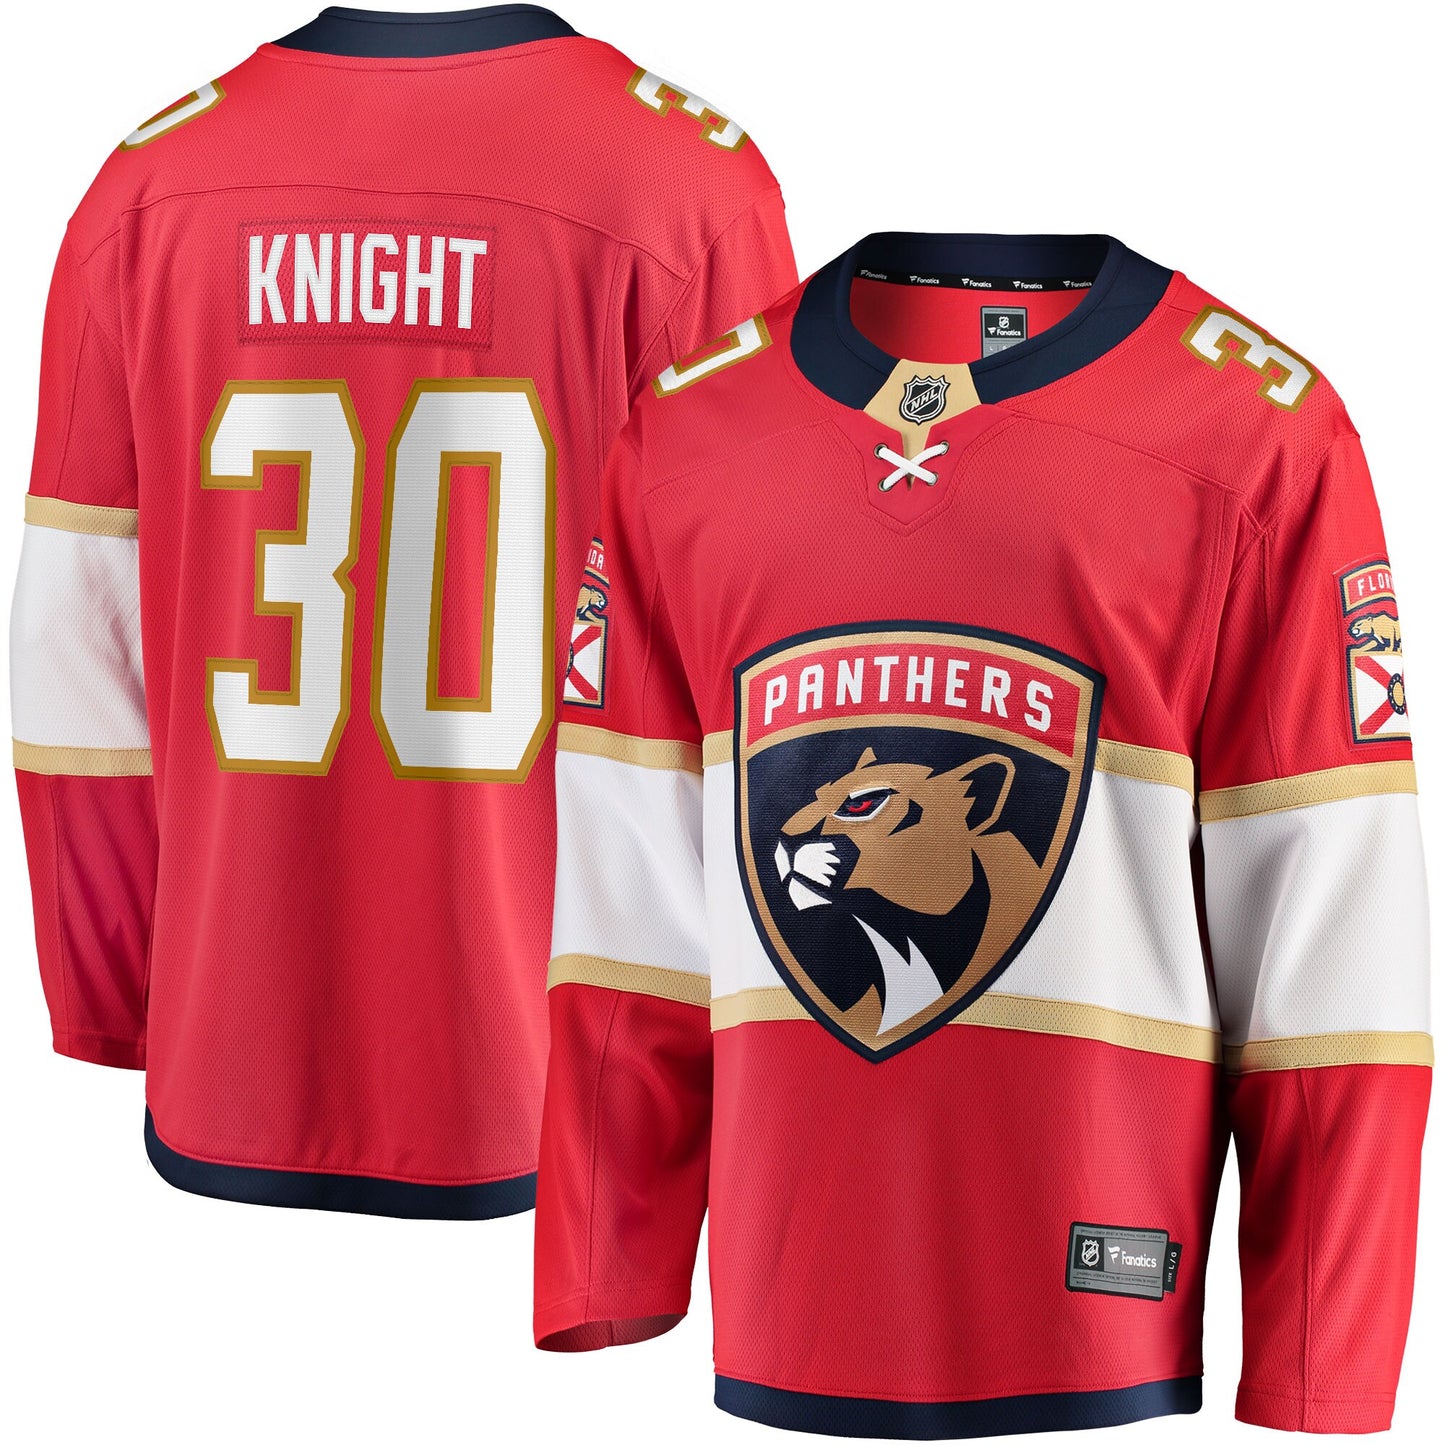 Spencer Knight Florida Panthers Fanatics Branded 2017/18 Home Breakaway Replica Jersey - Red